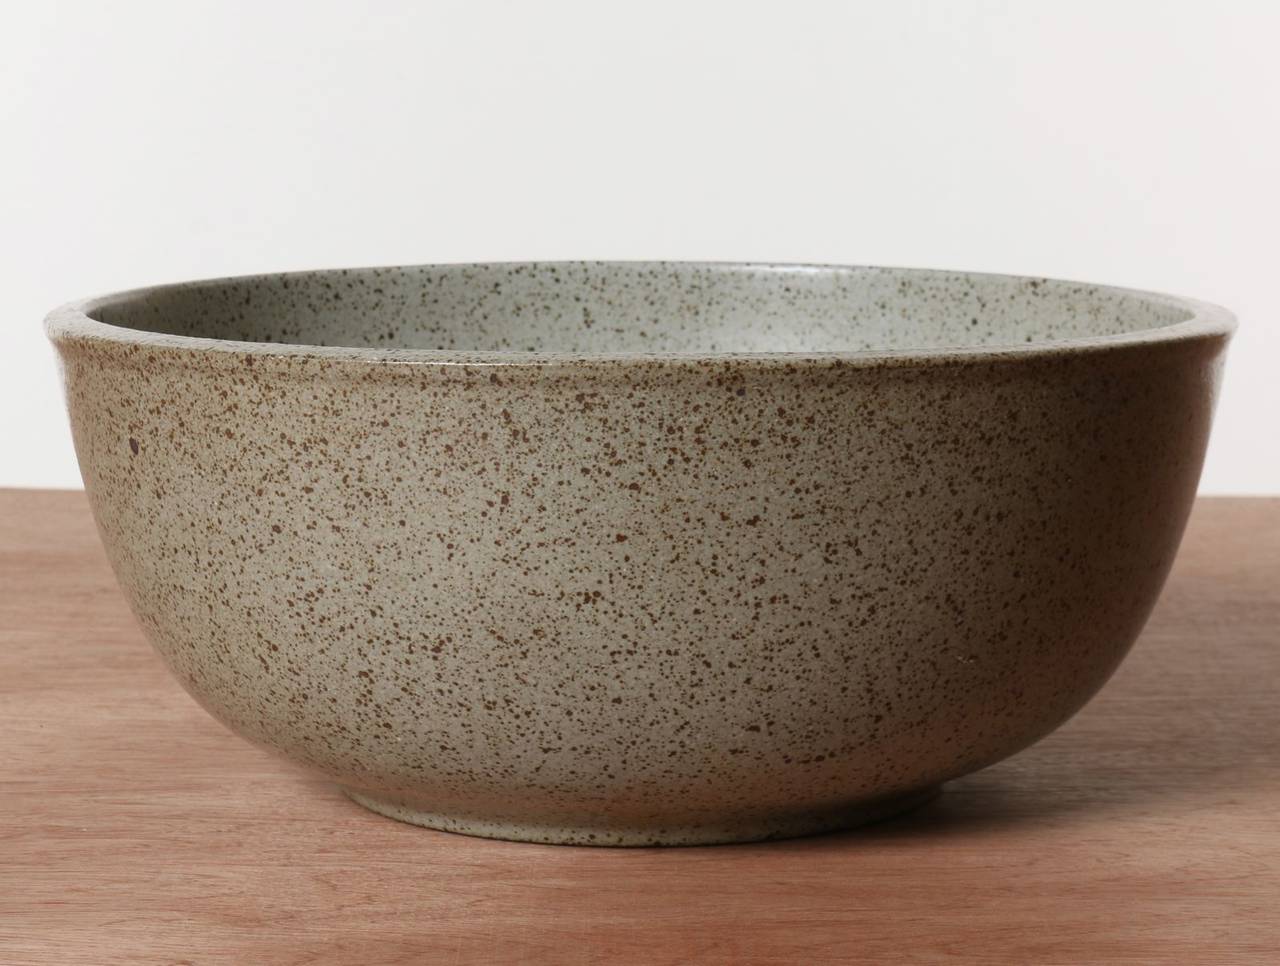 David Cressey Bowl for Architectural Pottery, Terra Major Gourmet-Ware 3